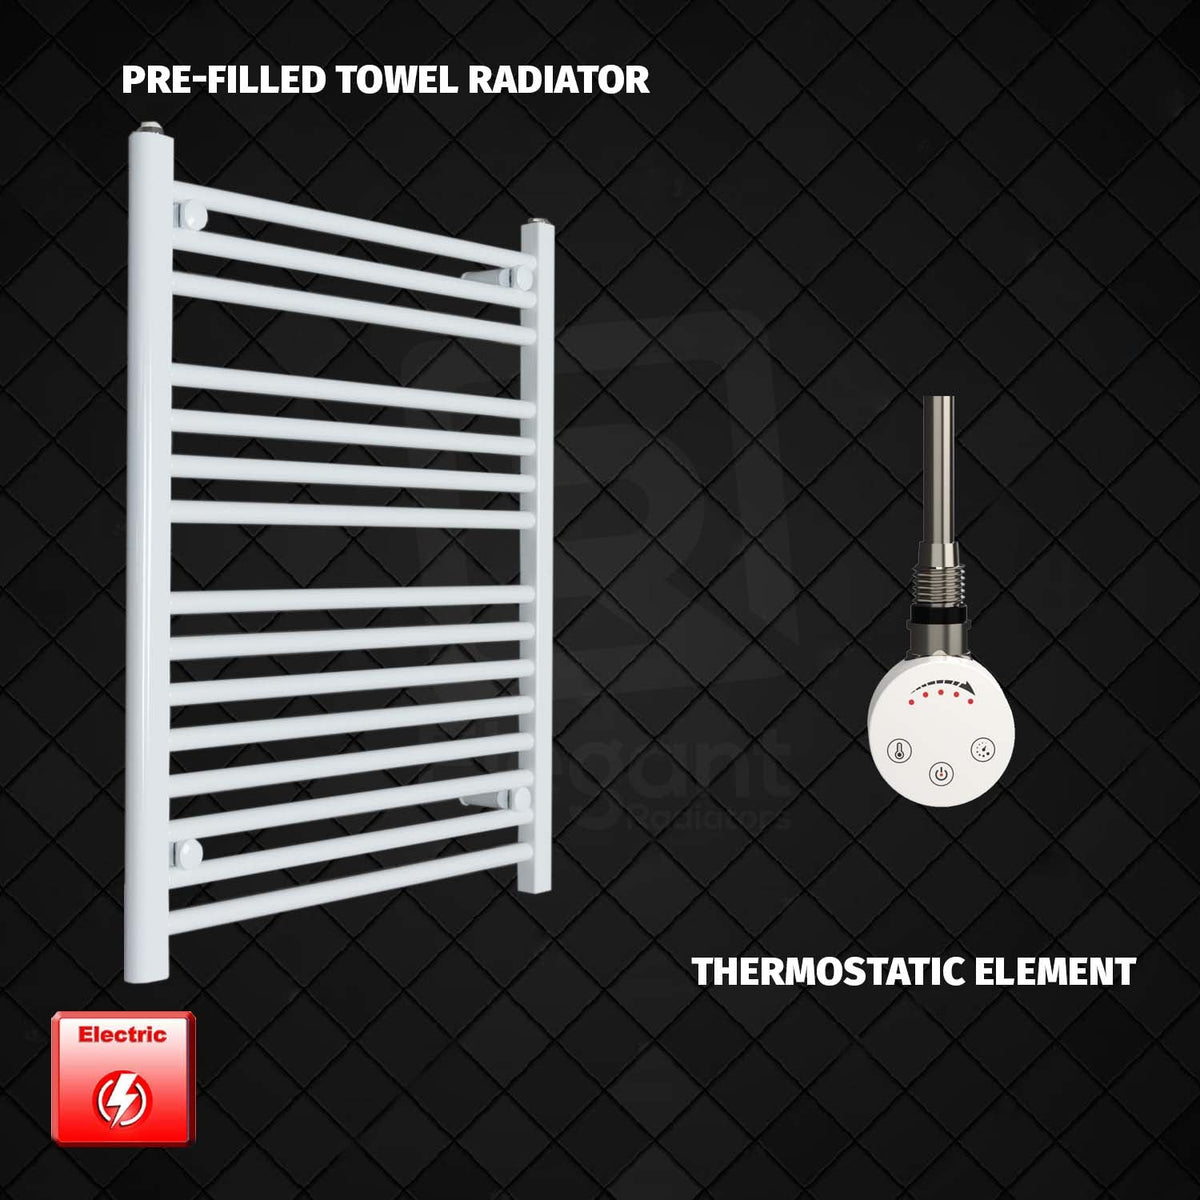 800 mm High 700 mm Wide Pre-Filled Electric Heated Towel Radiator White HTR SMR Thermostatic Element No Timer